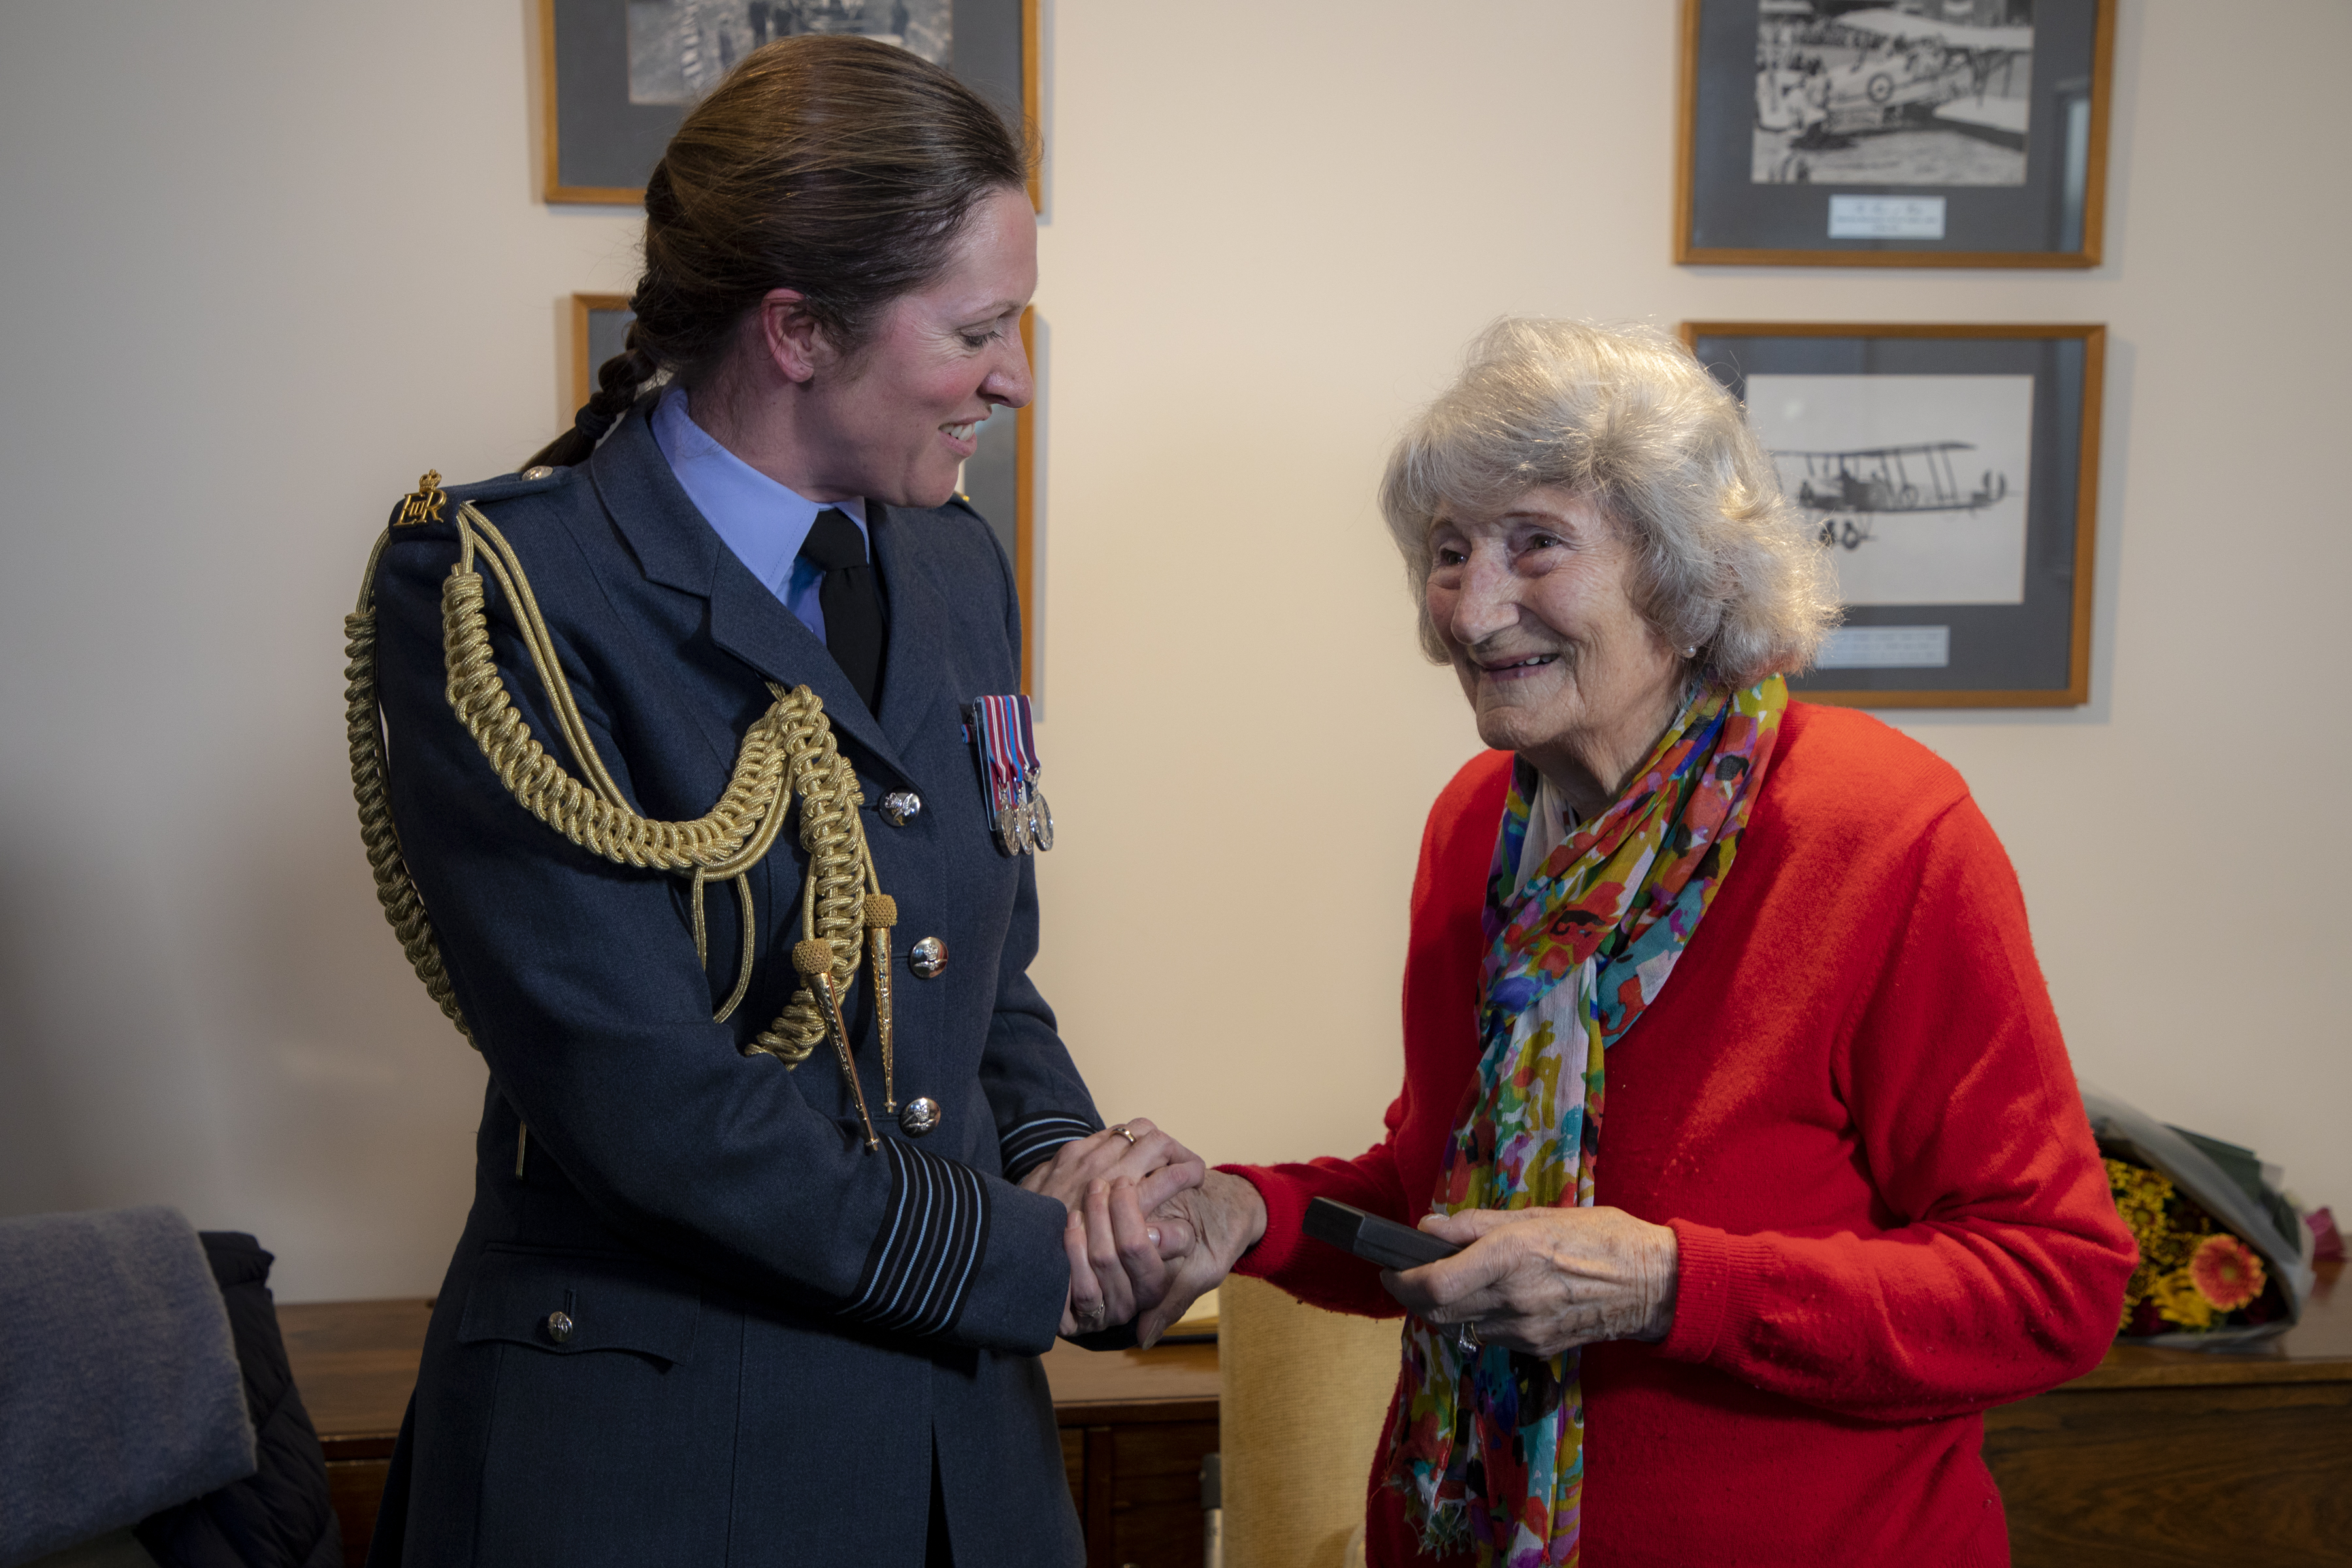 Image shows Veteran shaking hands with RAF aviator.